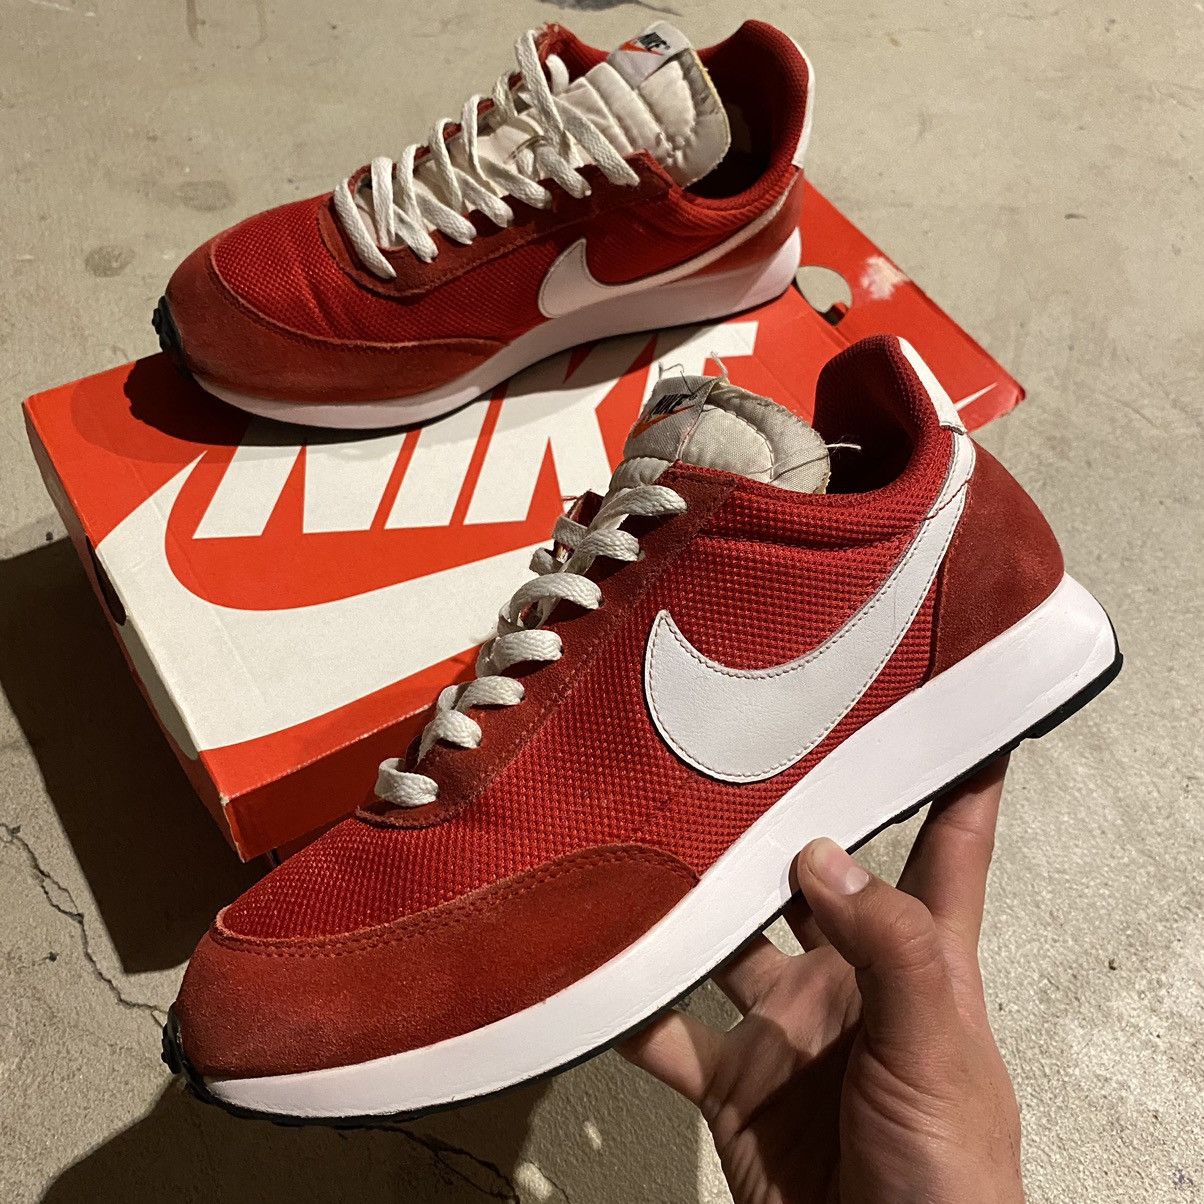 Nike Nike Air Tailwind 79’ Gym Red Size US 9 / EU 42 - 1 Preview